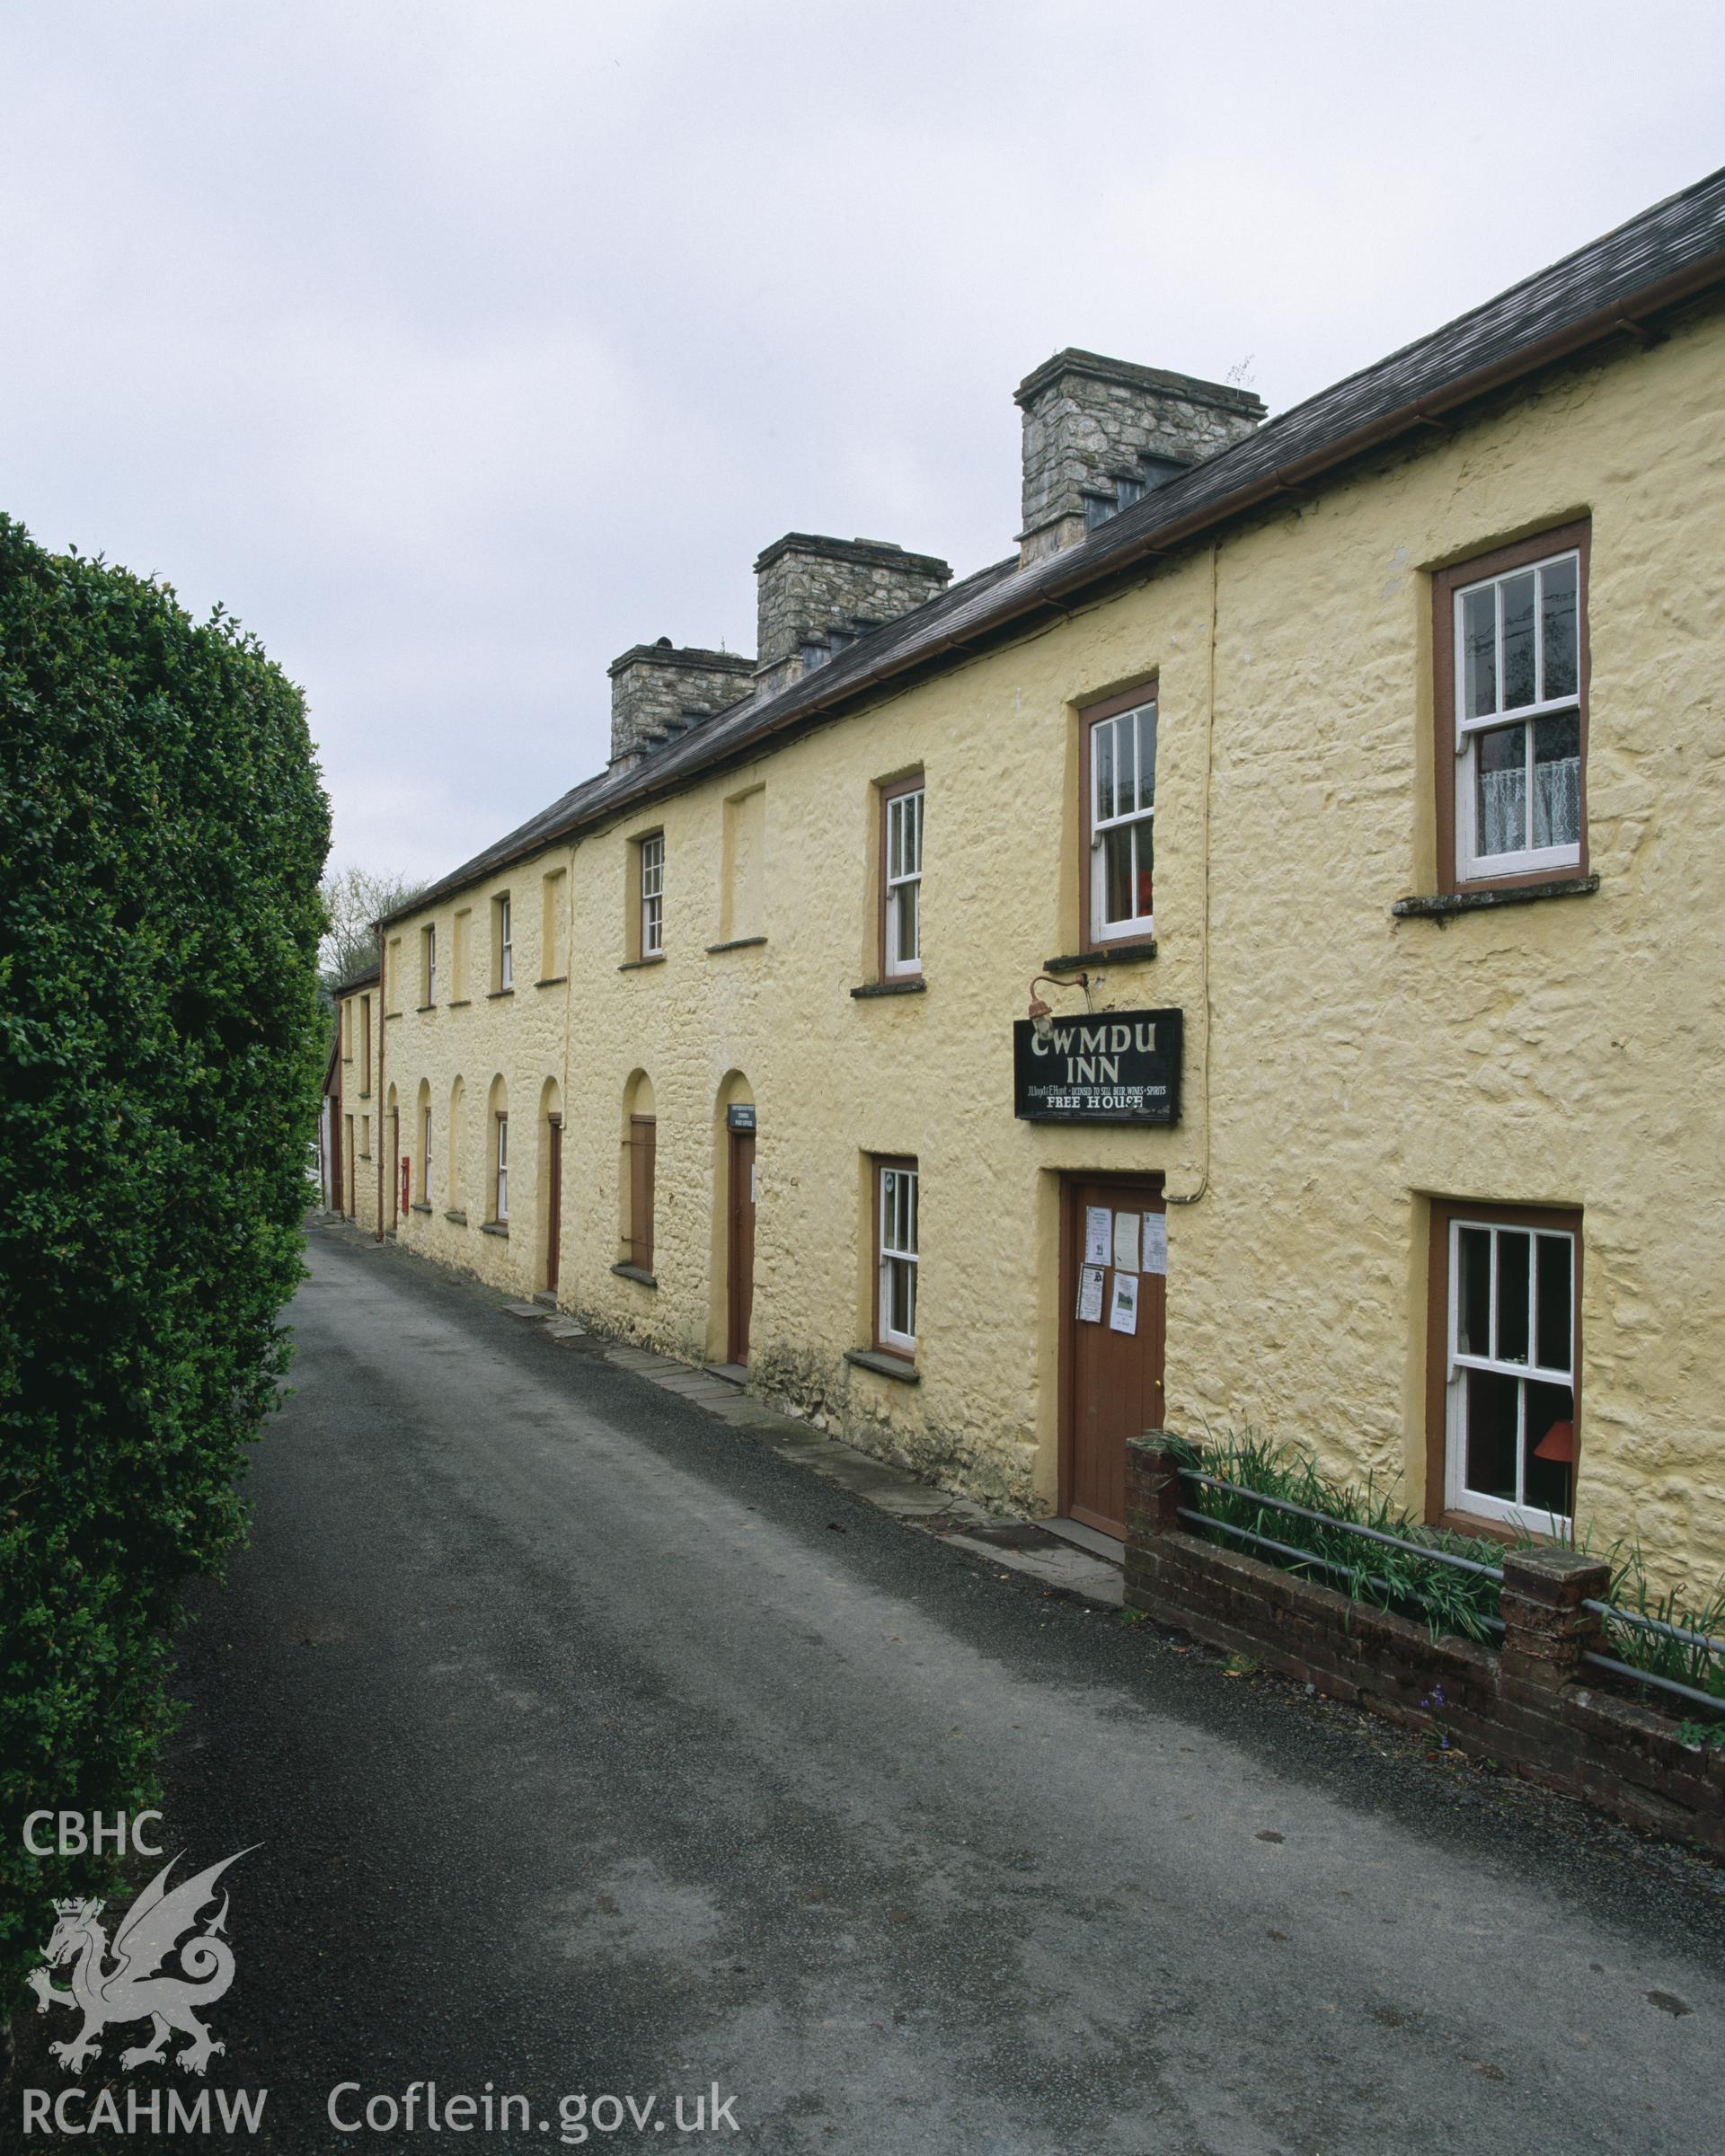 RCAHMW colour transparency showing exterior view of Cwmdu Inn.